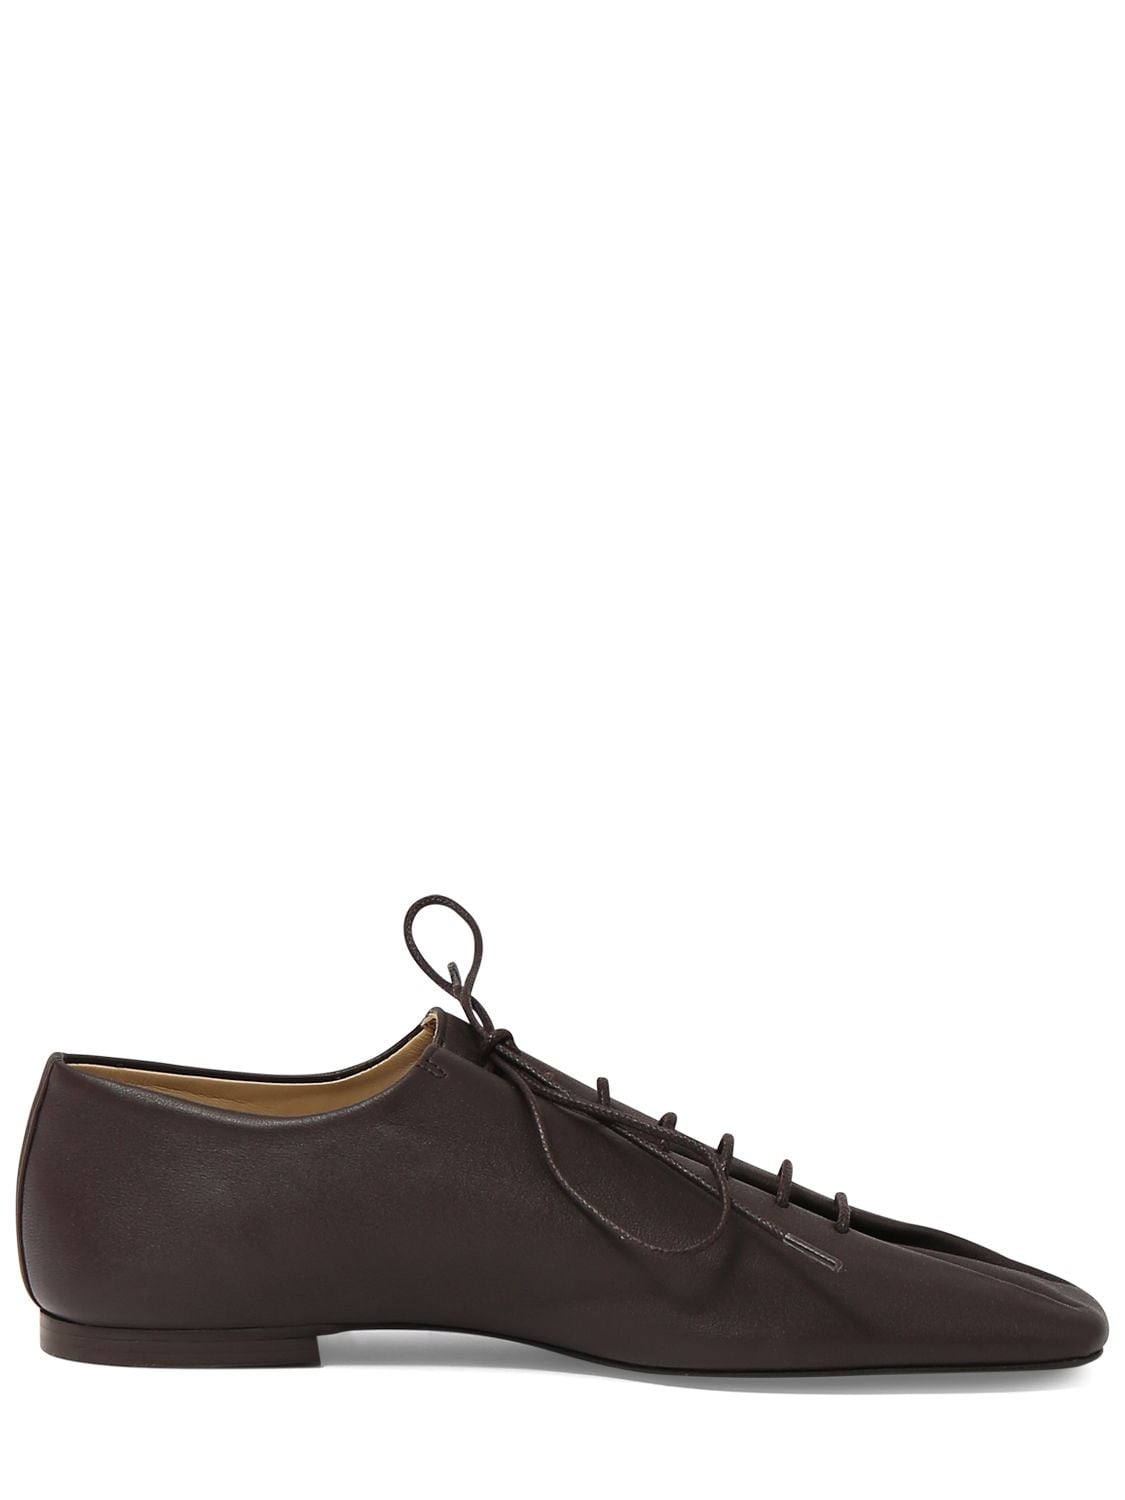 Lemaire Souris Flat Classic Derby Shoes In Dark Brown